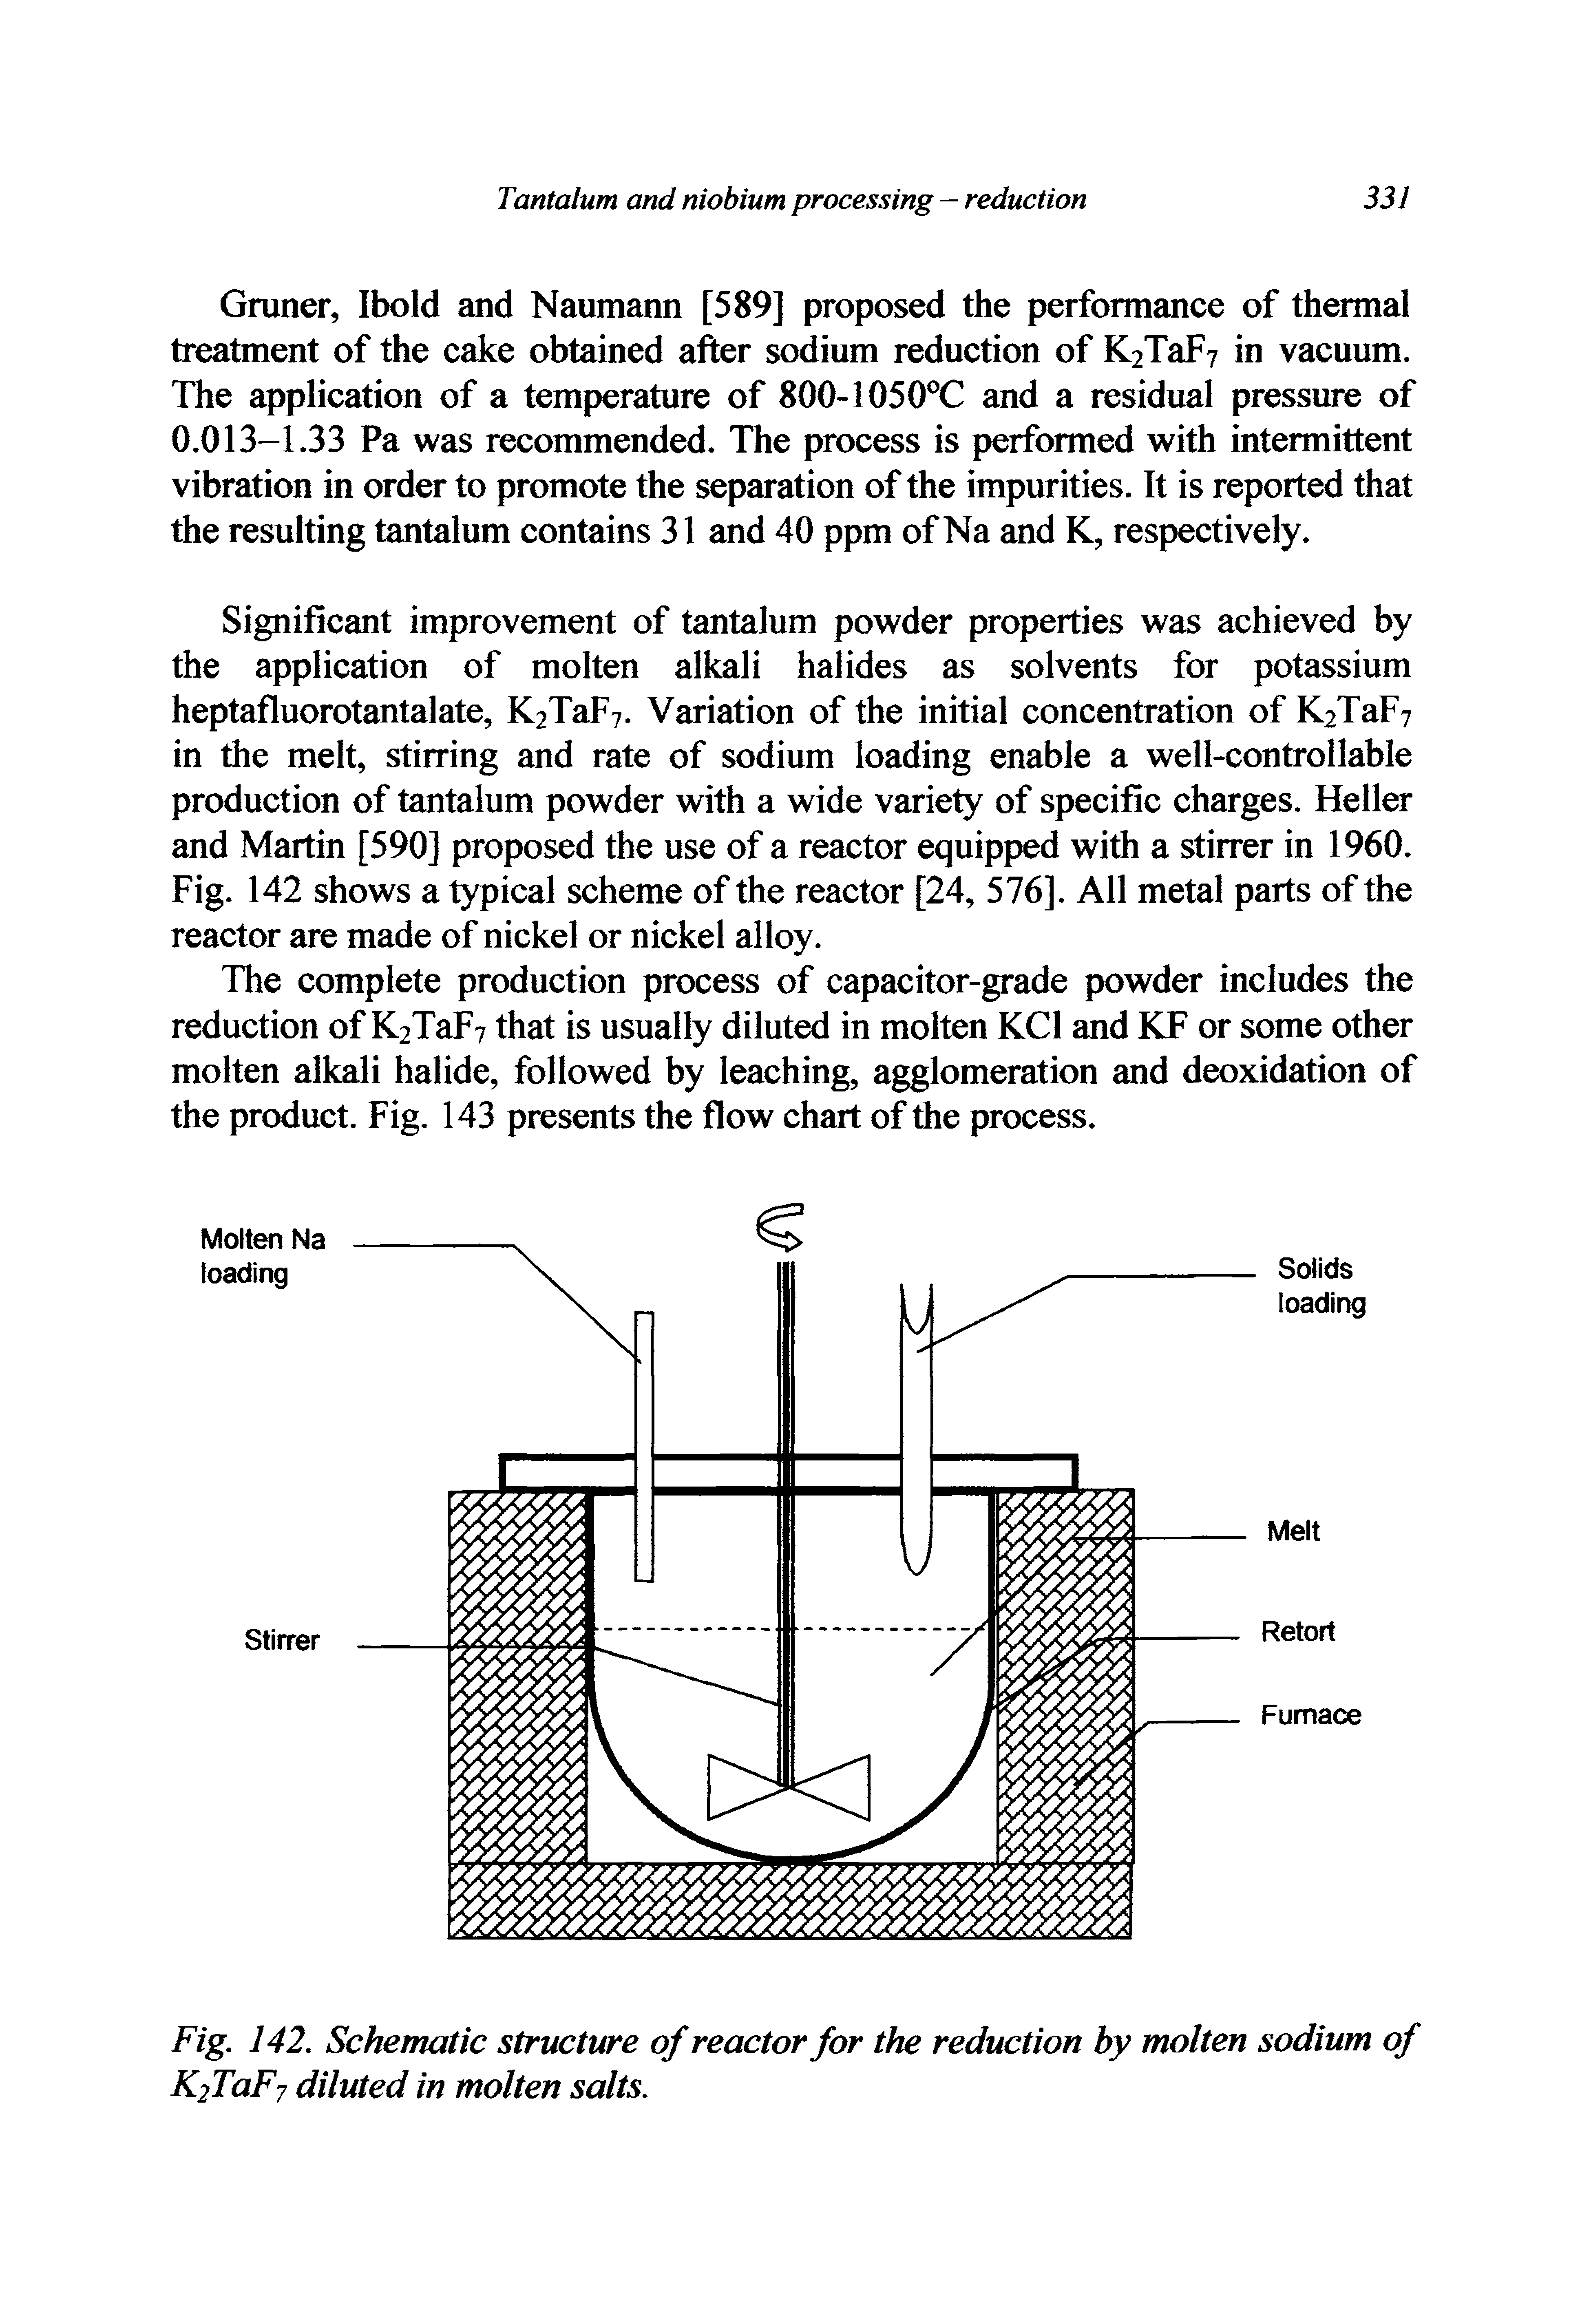 Fig. 142. Schematic structure of reactor for the reduction by molten sodium of KfTaFj diluted in molten salts.